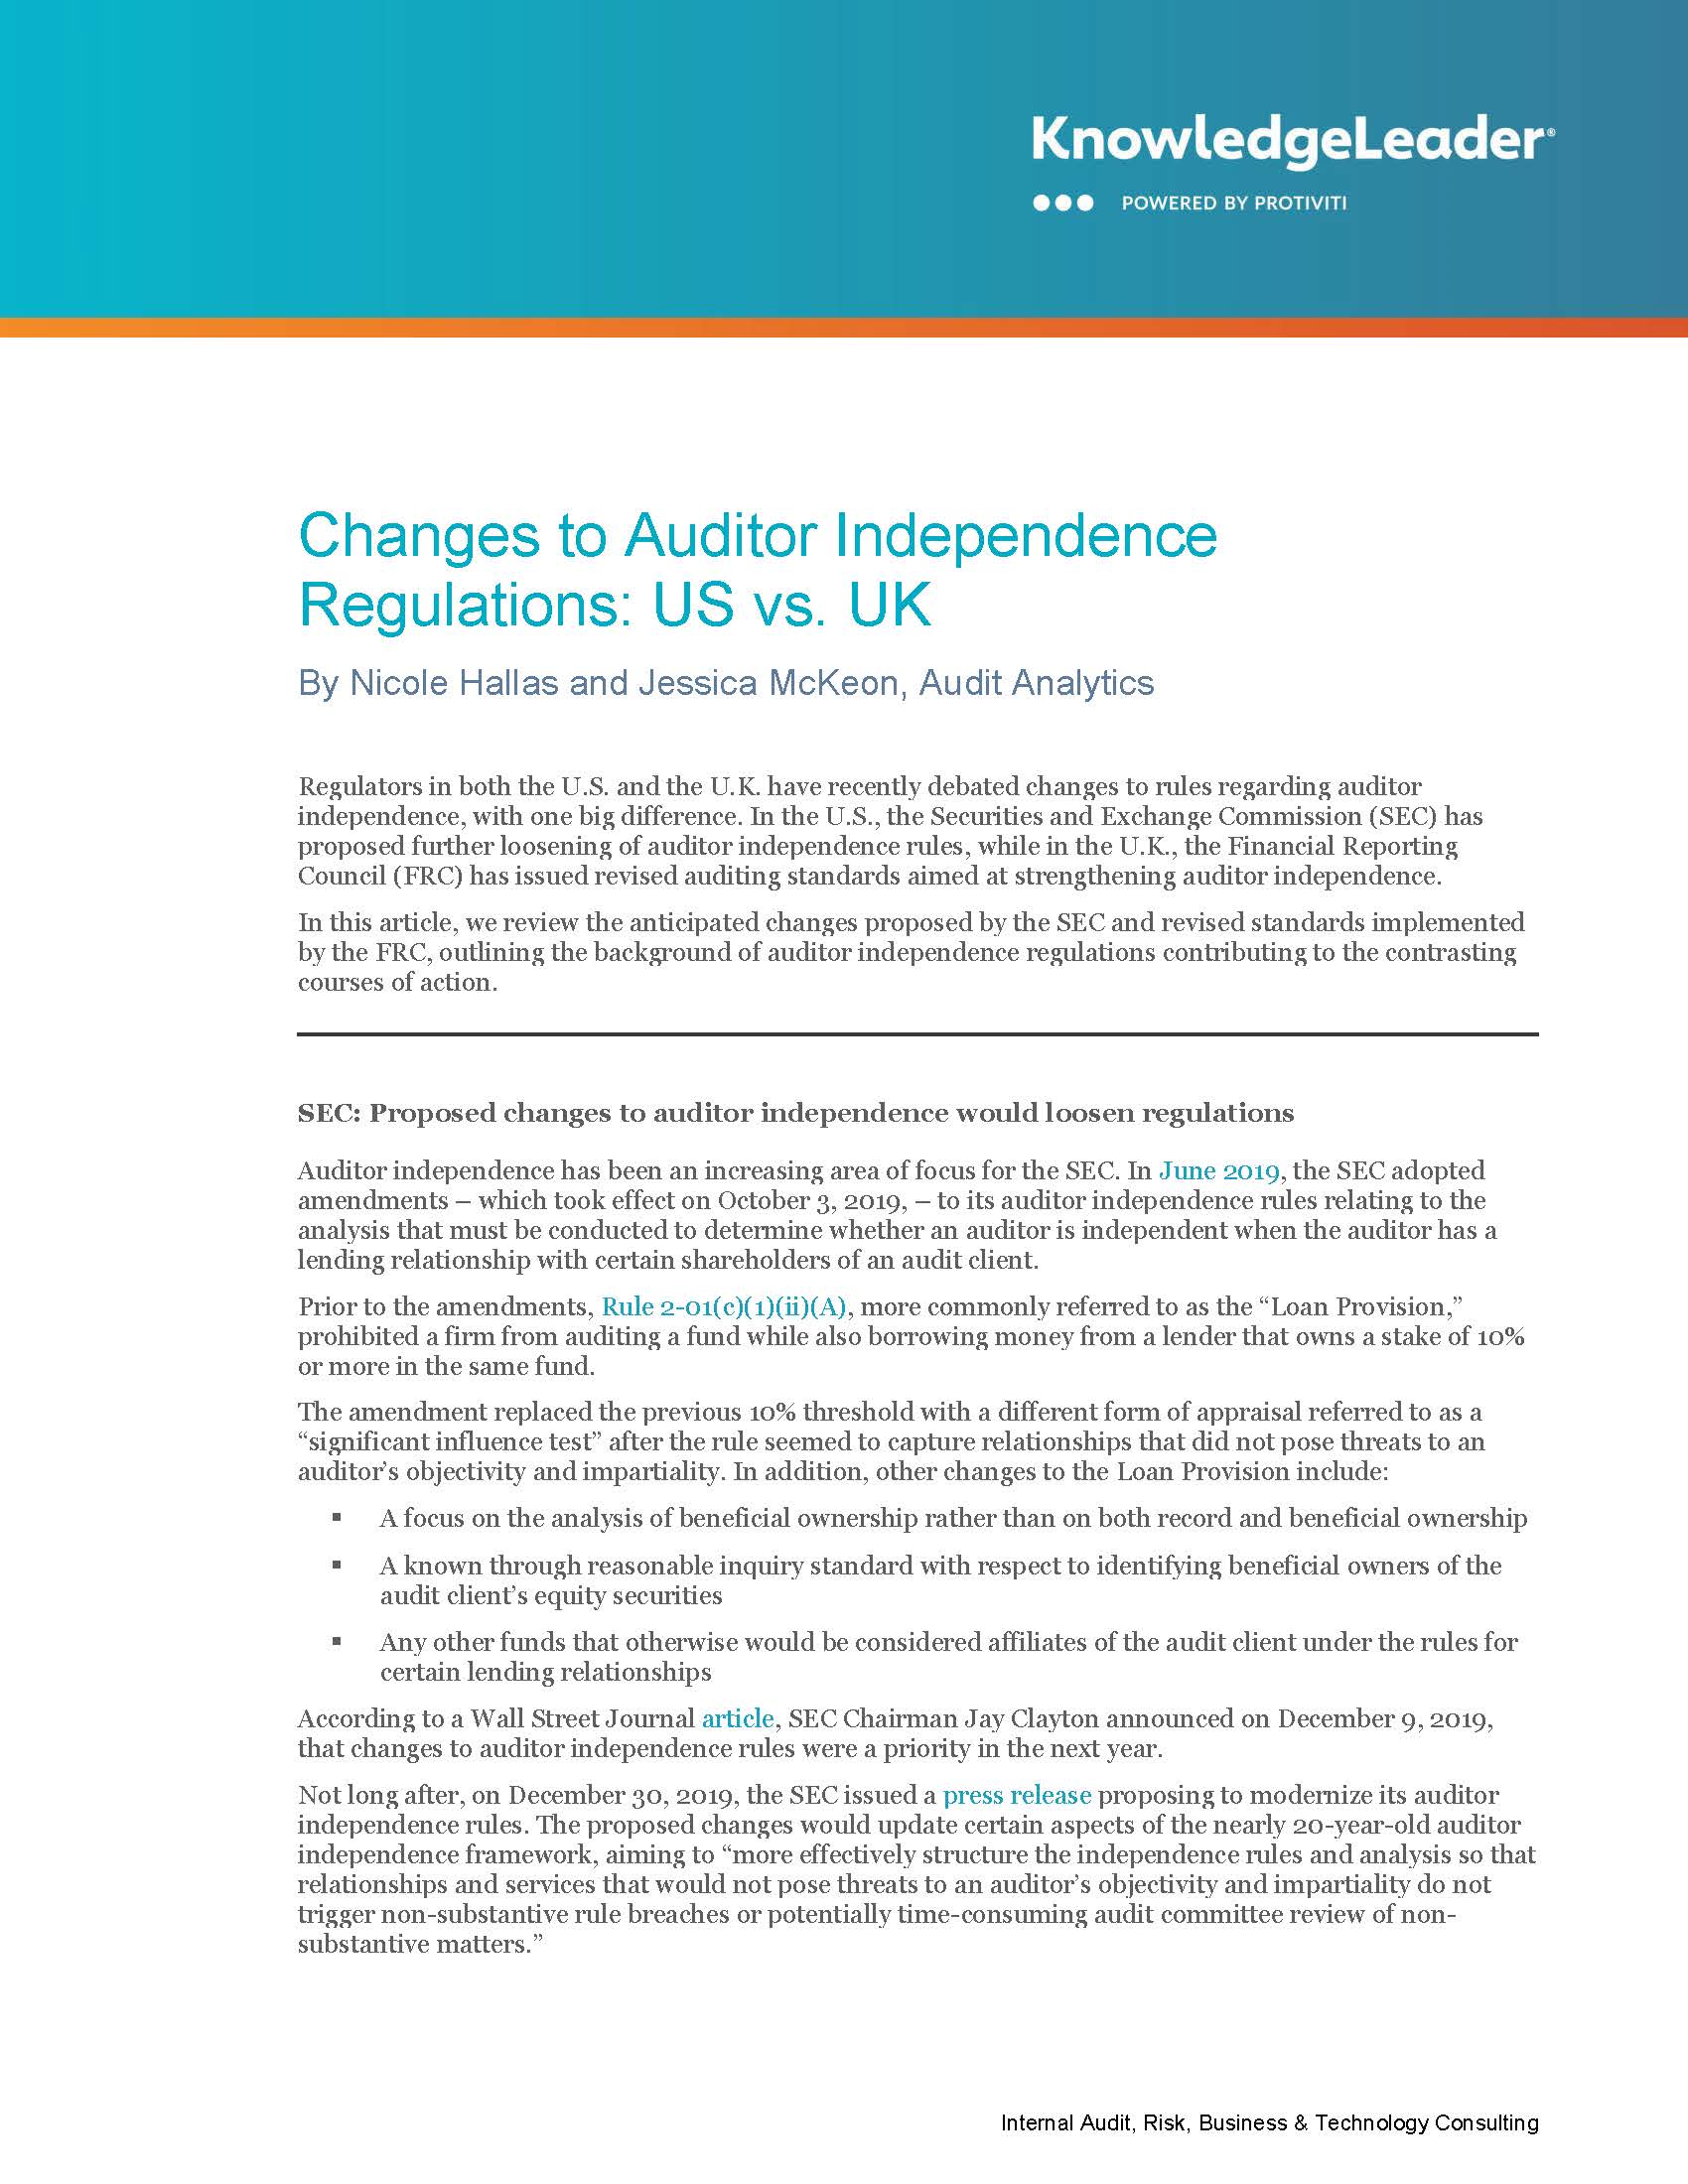 Screenshot of the first page of Changes to Auditor Independence Regulations US vs. UK